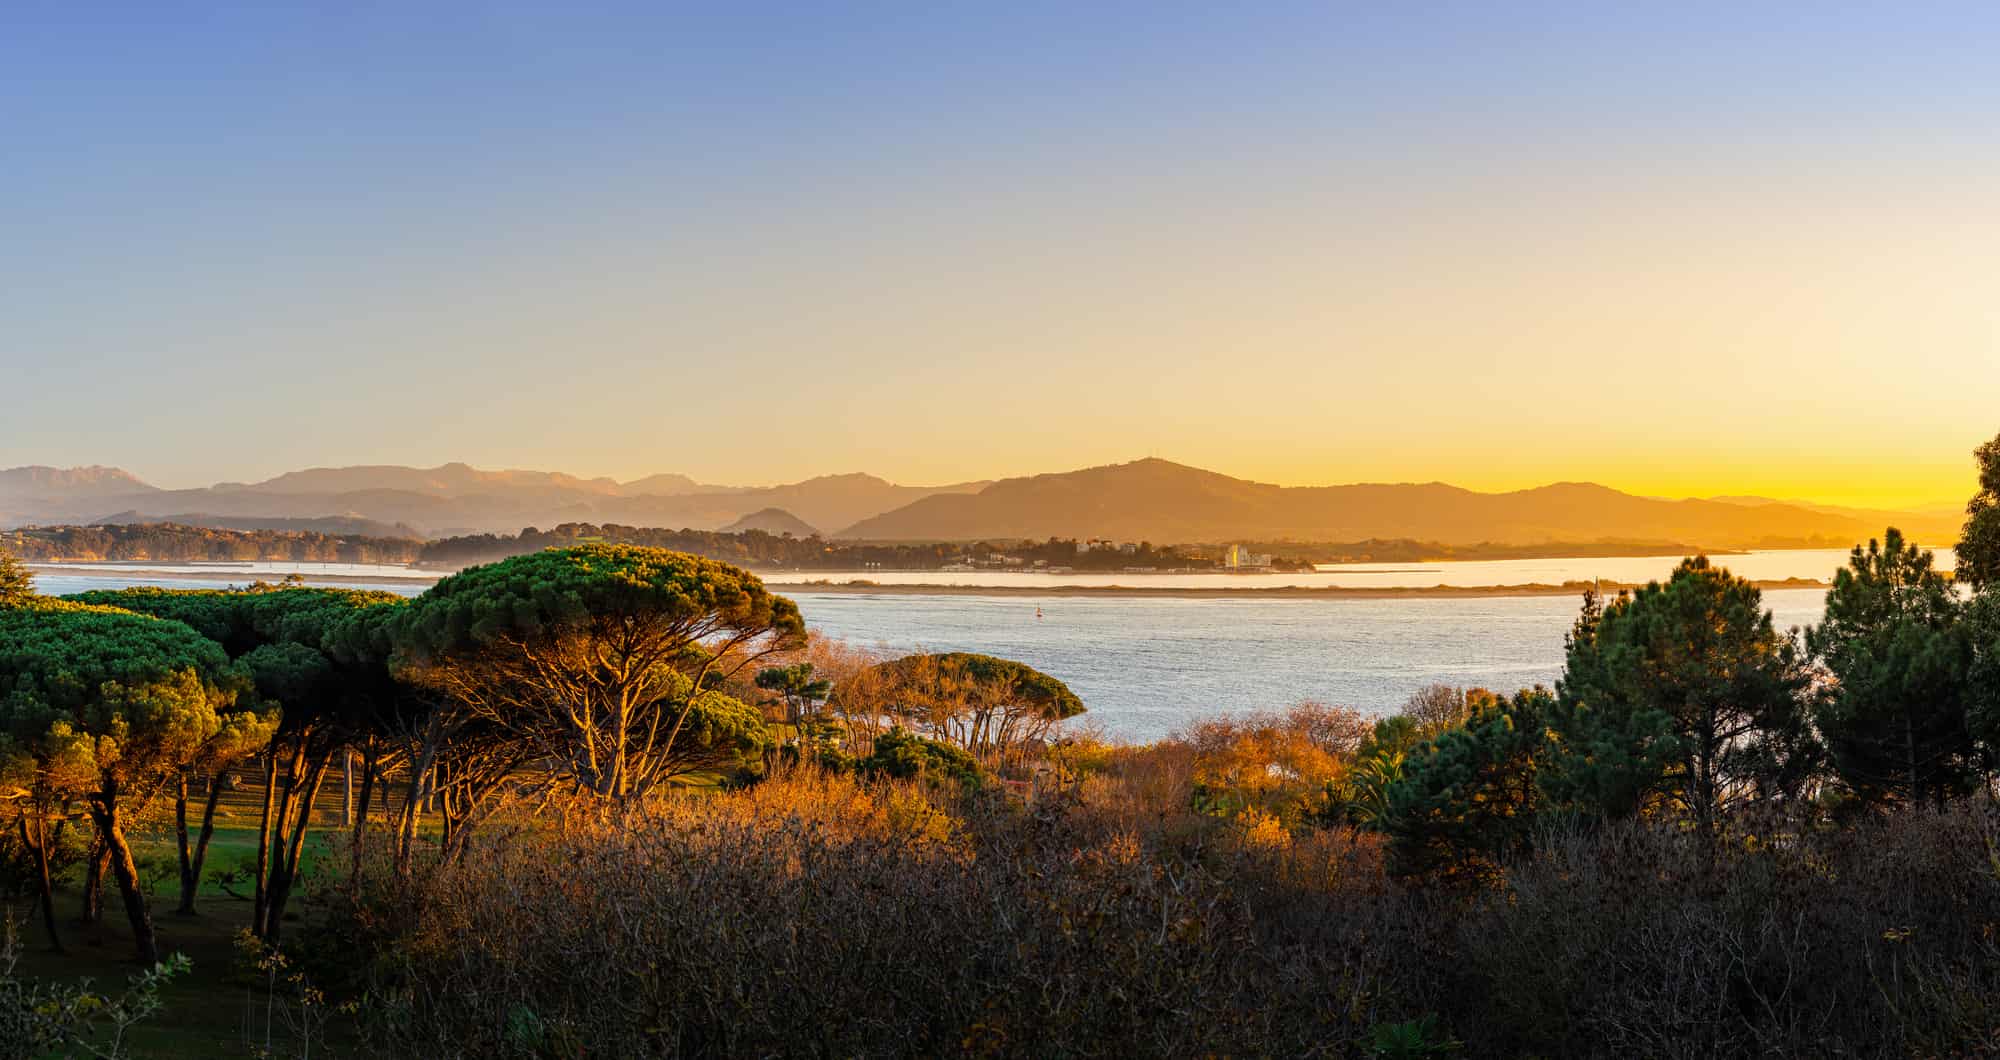 Stunning panoramic views of the fantastic evening light in Santander Bay. View from the Magdalena Peninsula to the Cantabrian Mountains. Santander, Cantabria, Spain